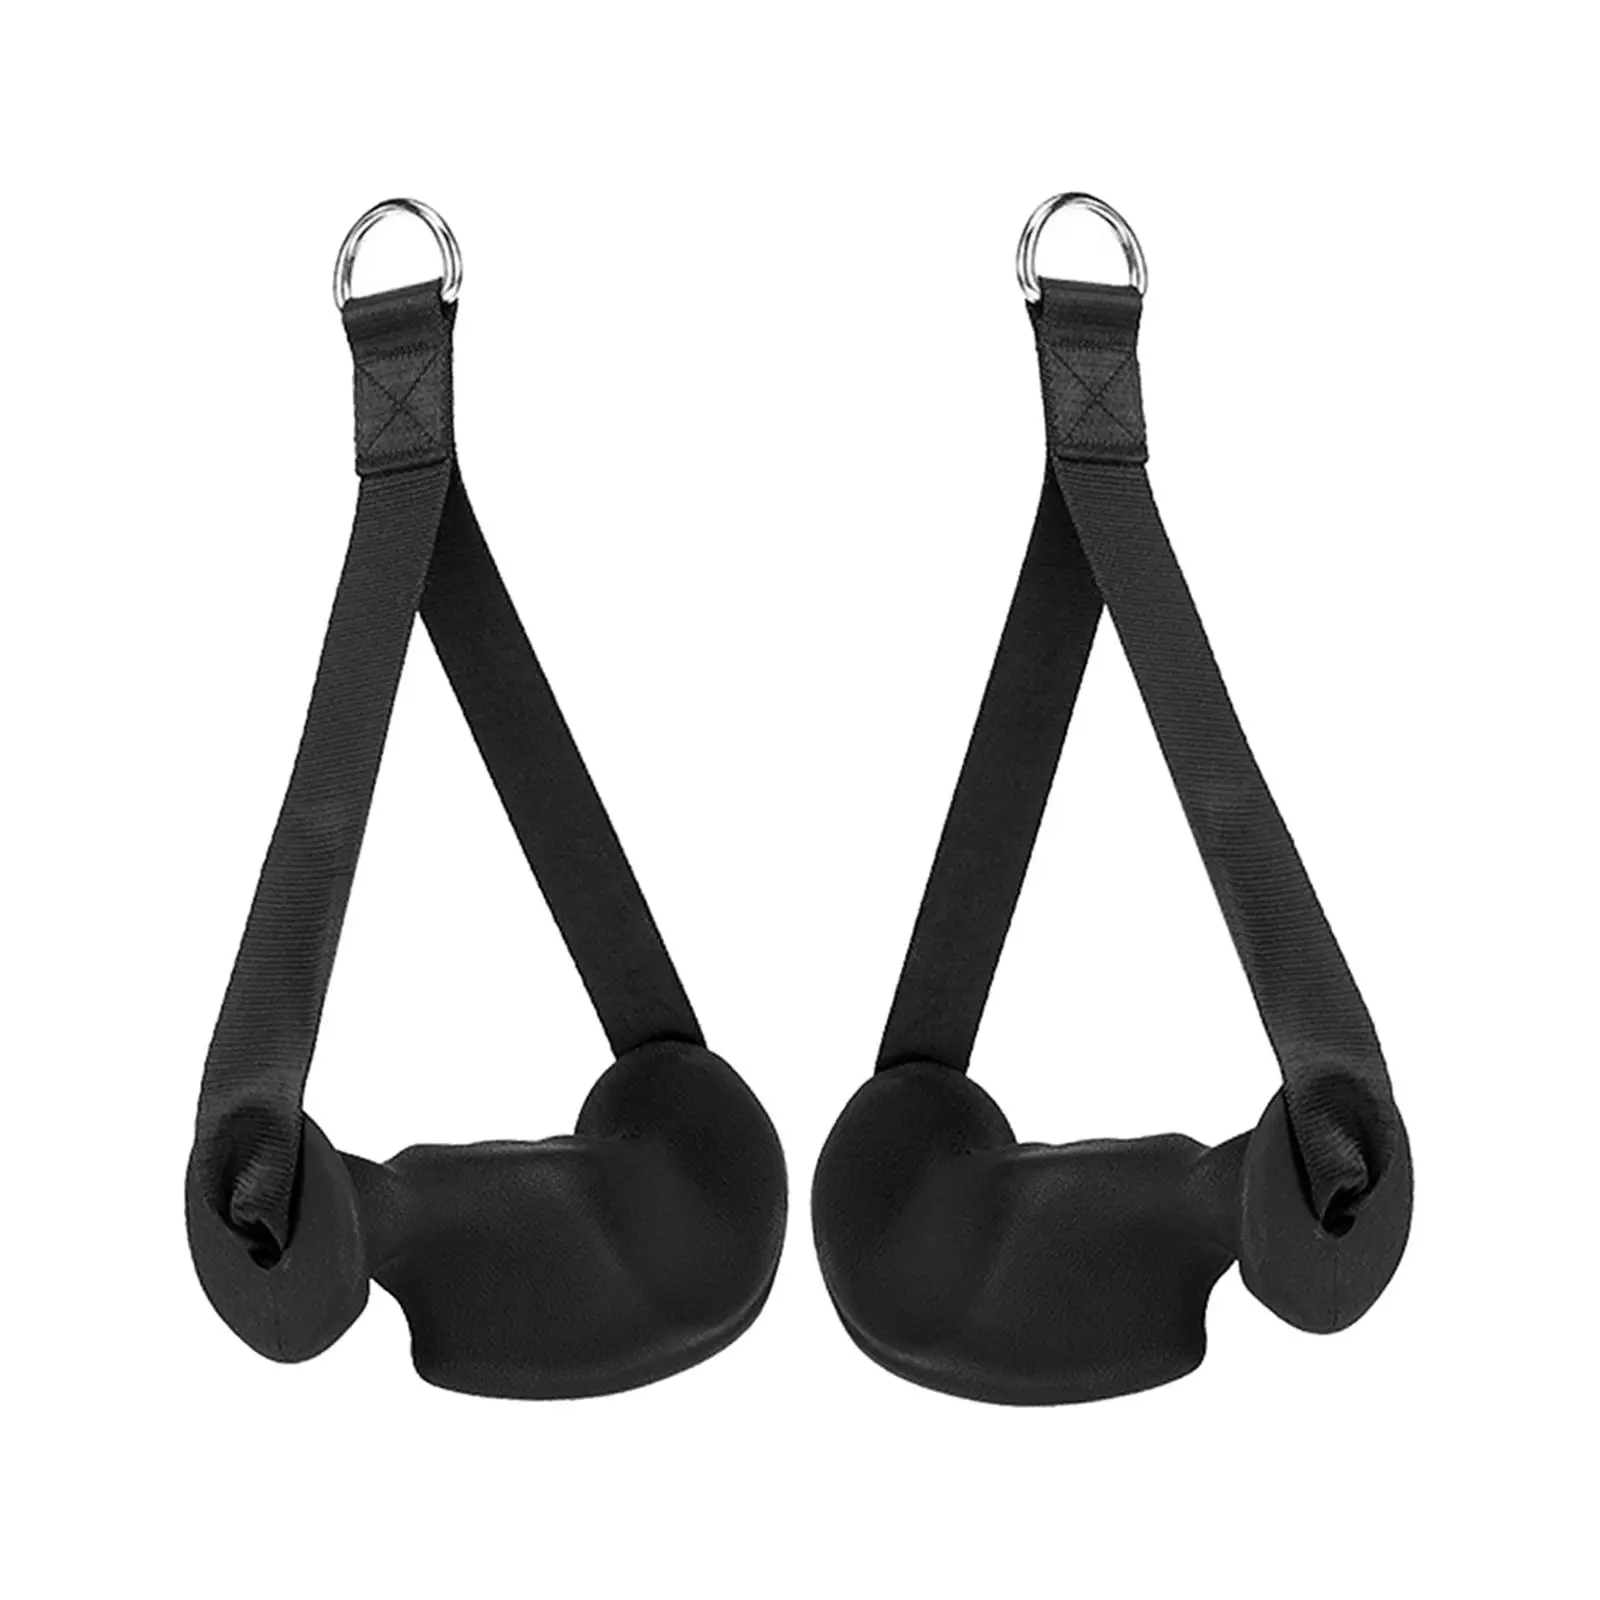 

Cable Machine Handles Exercise Handles Ergonomic Design Attachment Grips Resistance Band Grips for Home Gym Use Bodybuilding